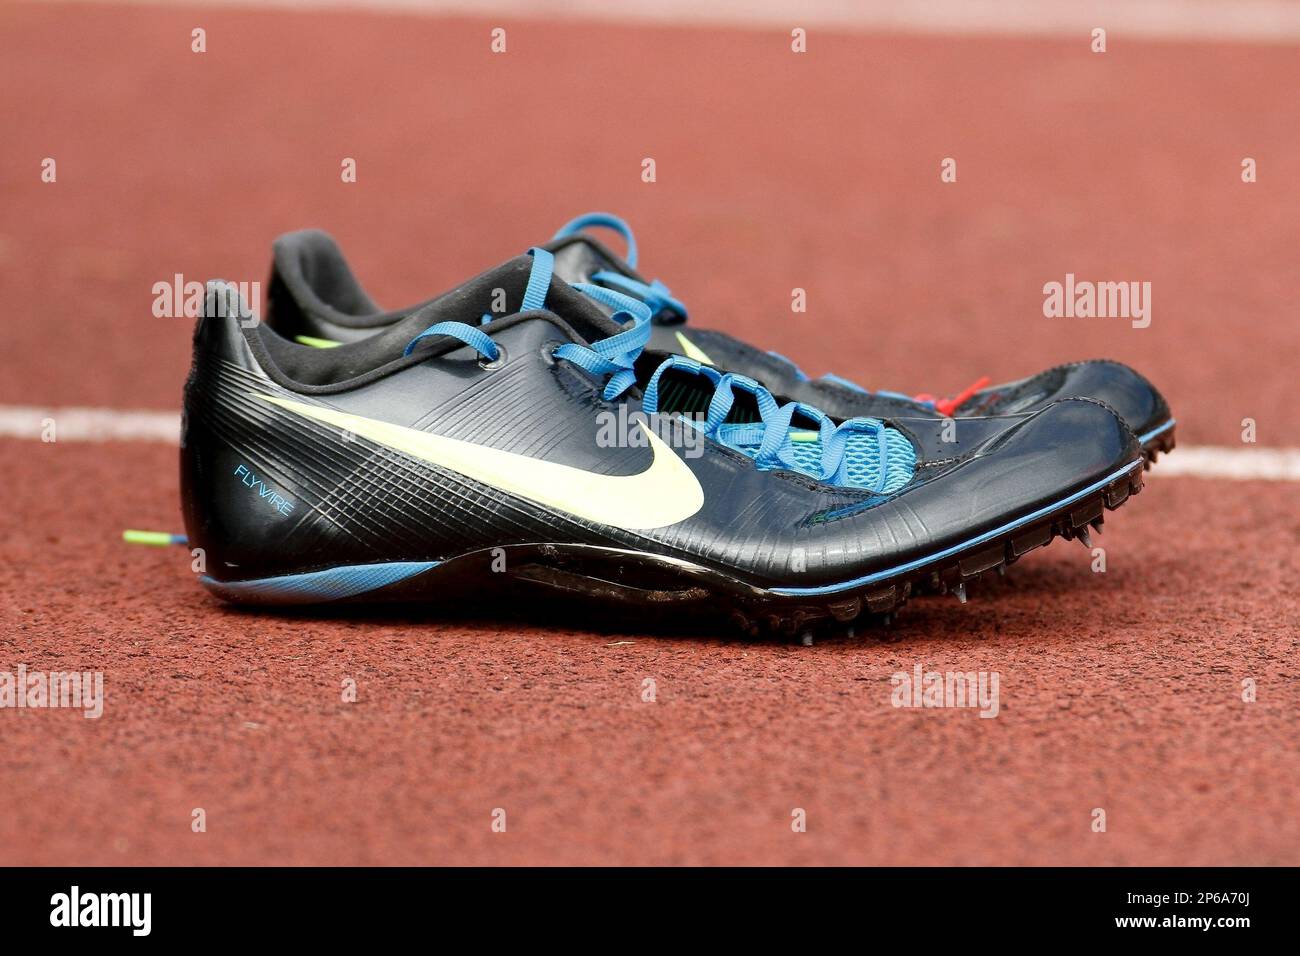 A pair of NIKE Flywire Sprinting Shoes worn by USA Sprinter Maurice  Mitchell during his work-out as he trains for the Olympics in London on  July 12, 2012 on Mike Long Track